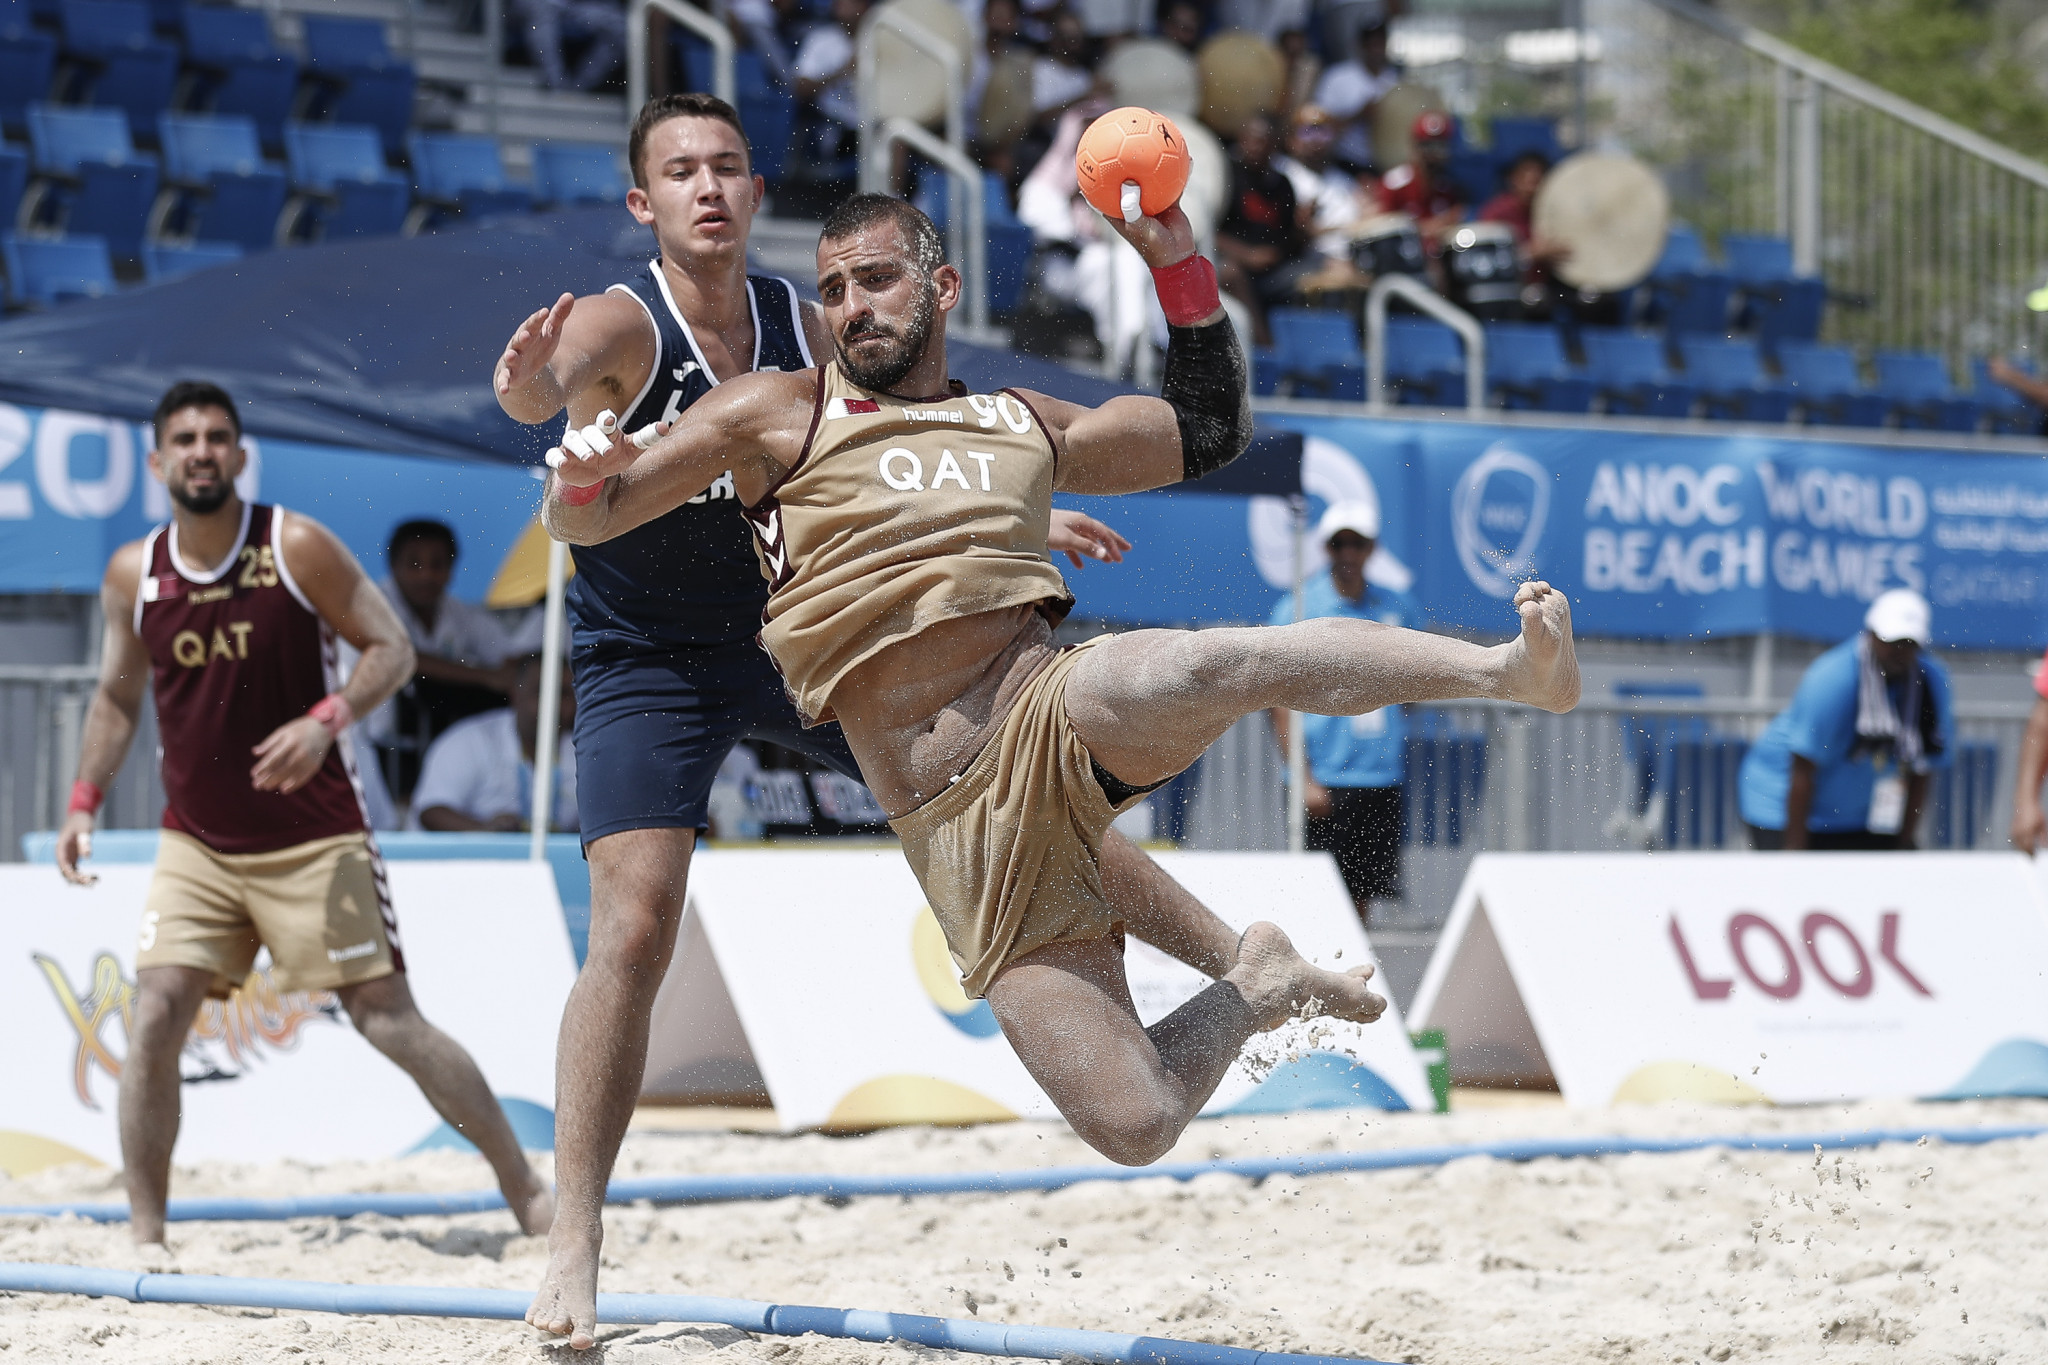 Qatar's men impressed on home sand with a pair of victories ©ANOC